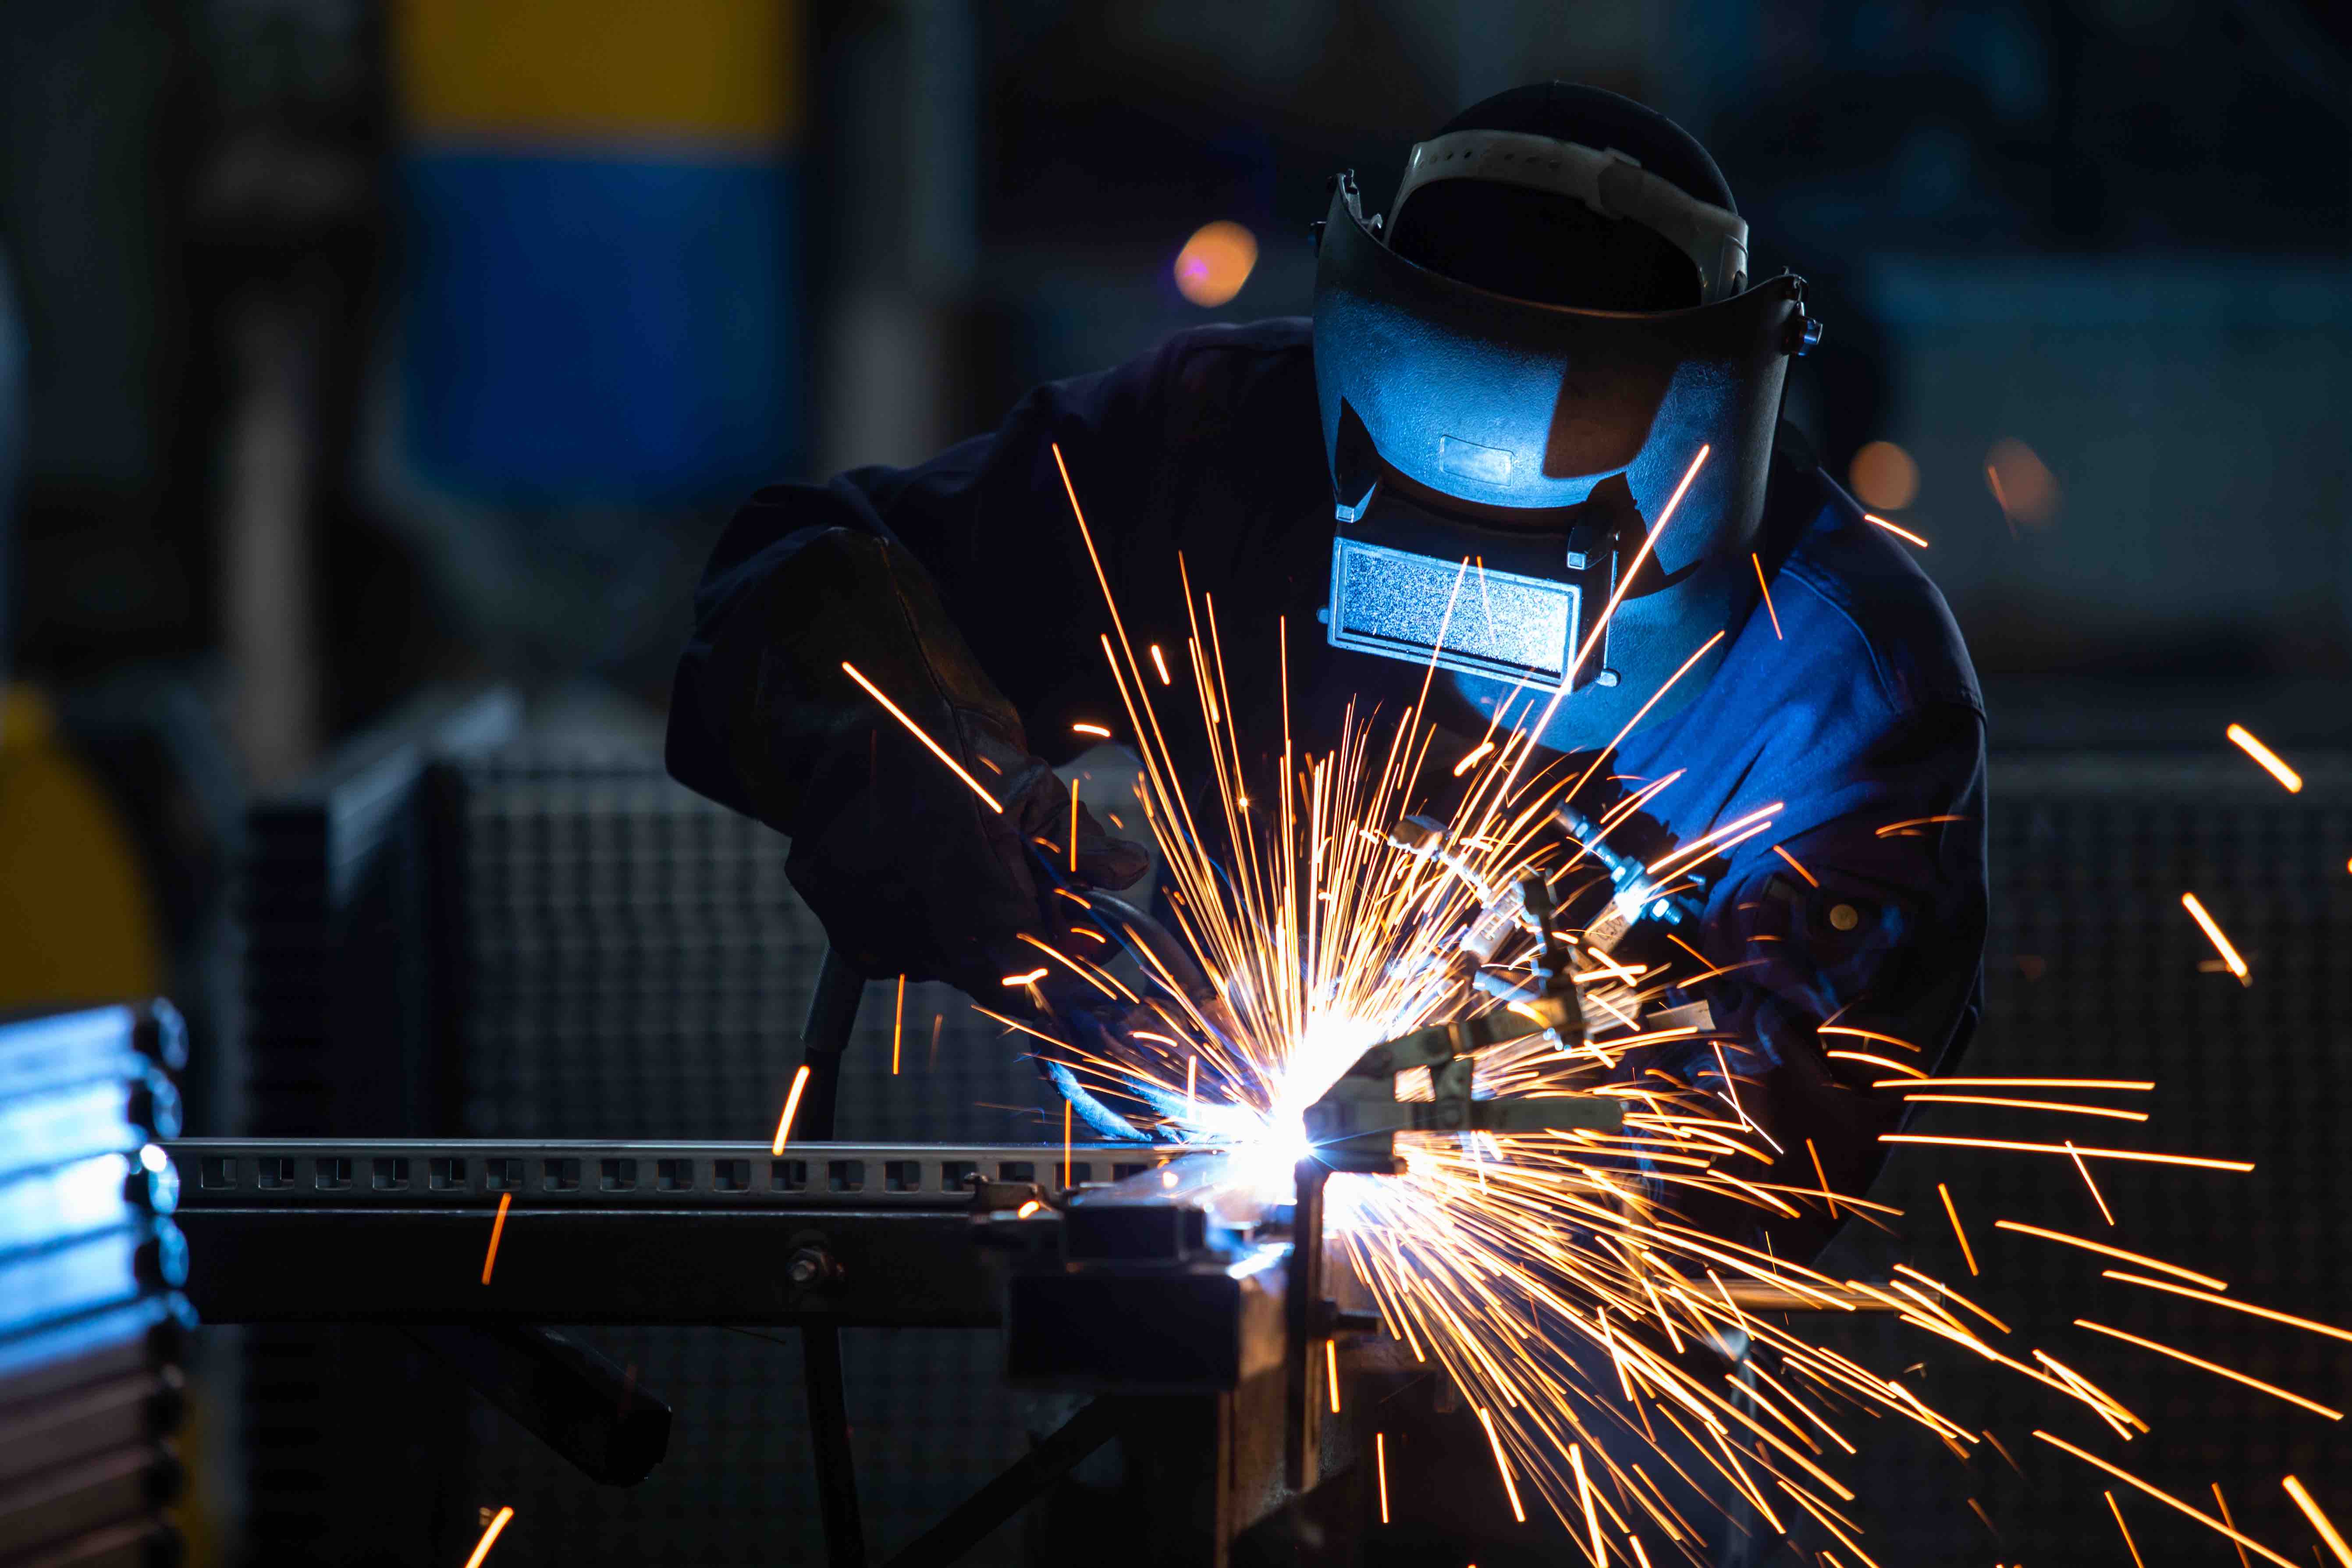 A person welding wearing a welding mask with flying sparks.